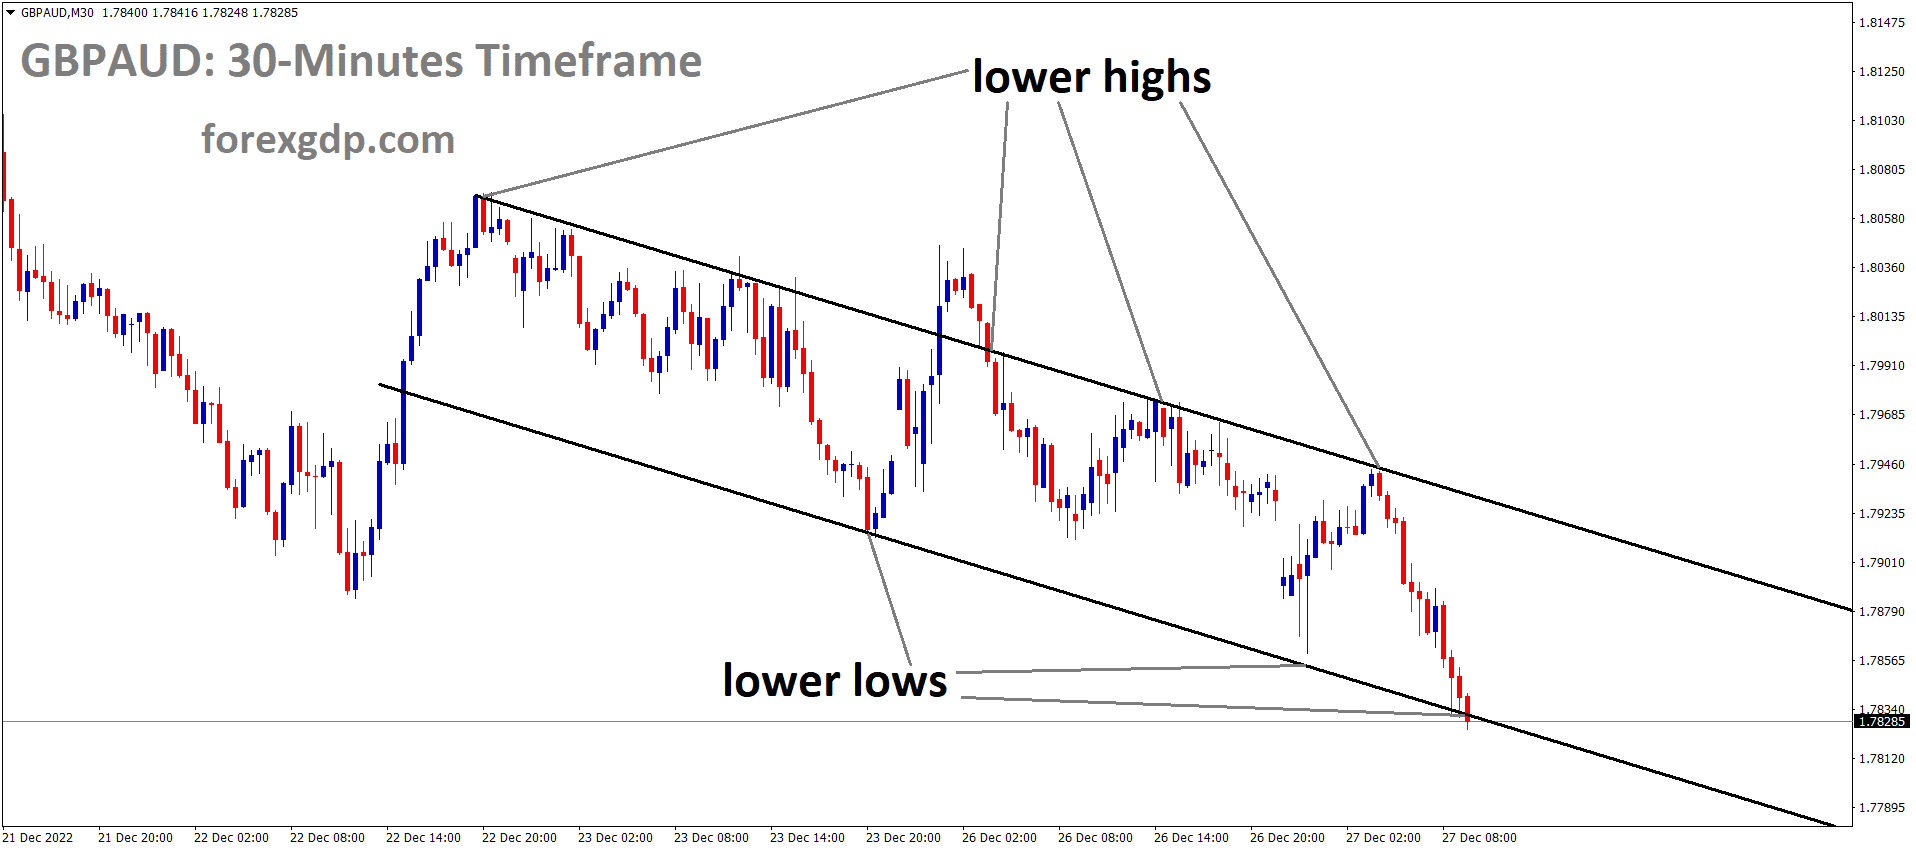 GBPAUD is moving in the Descending channel and the market has reached the lower low area of the channel